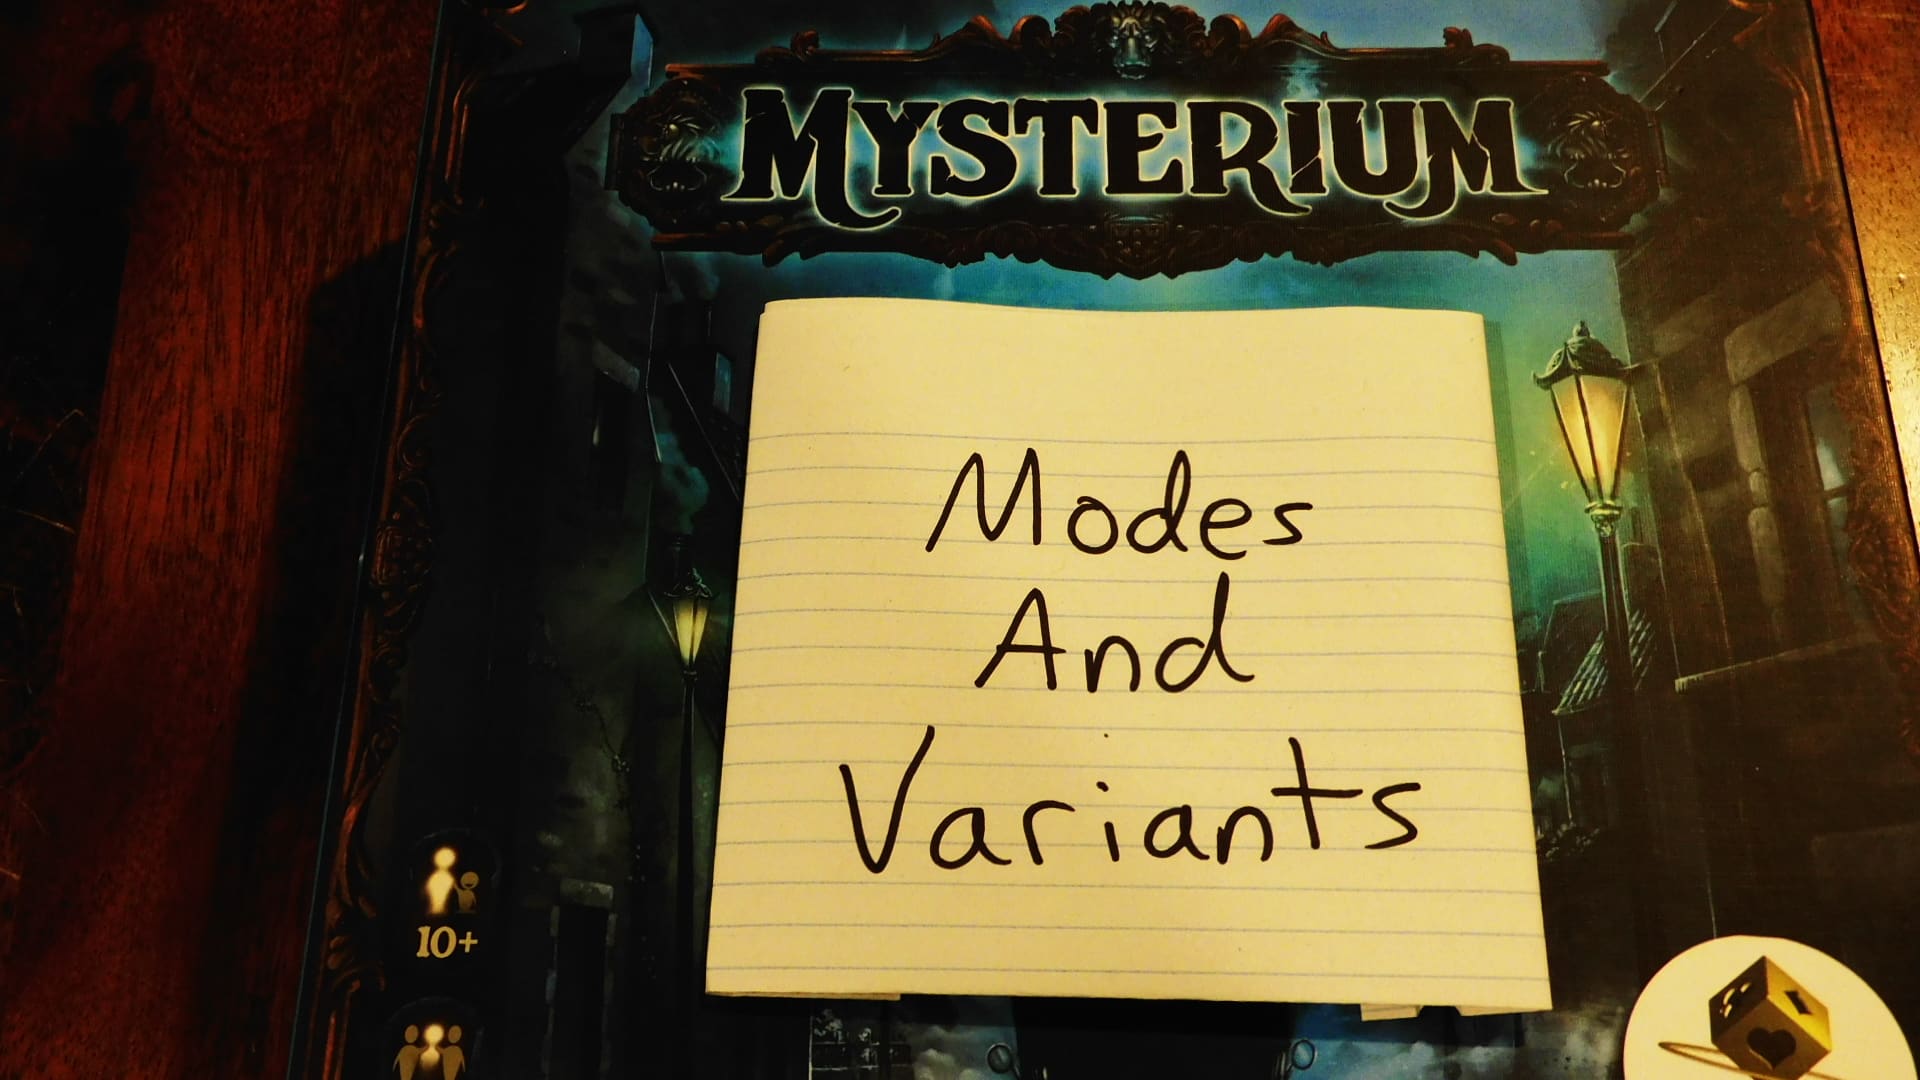 Mysterium's game box with a piece of paper on it reading "Modes And Variants."